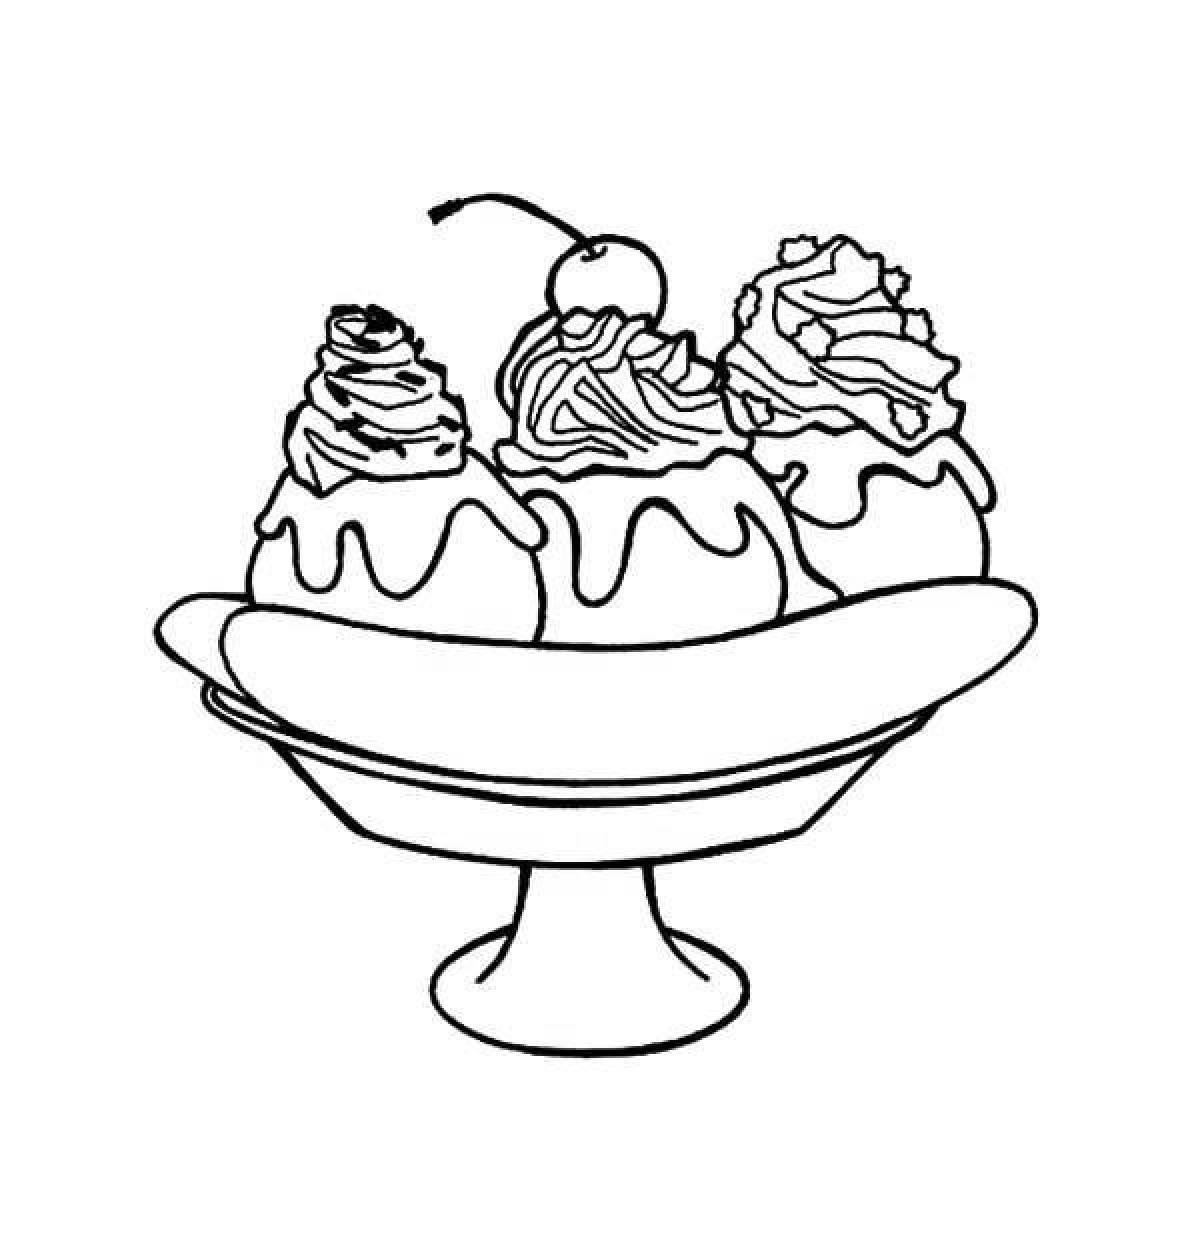 Colorful dessert coloring page